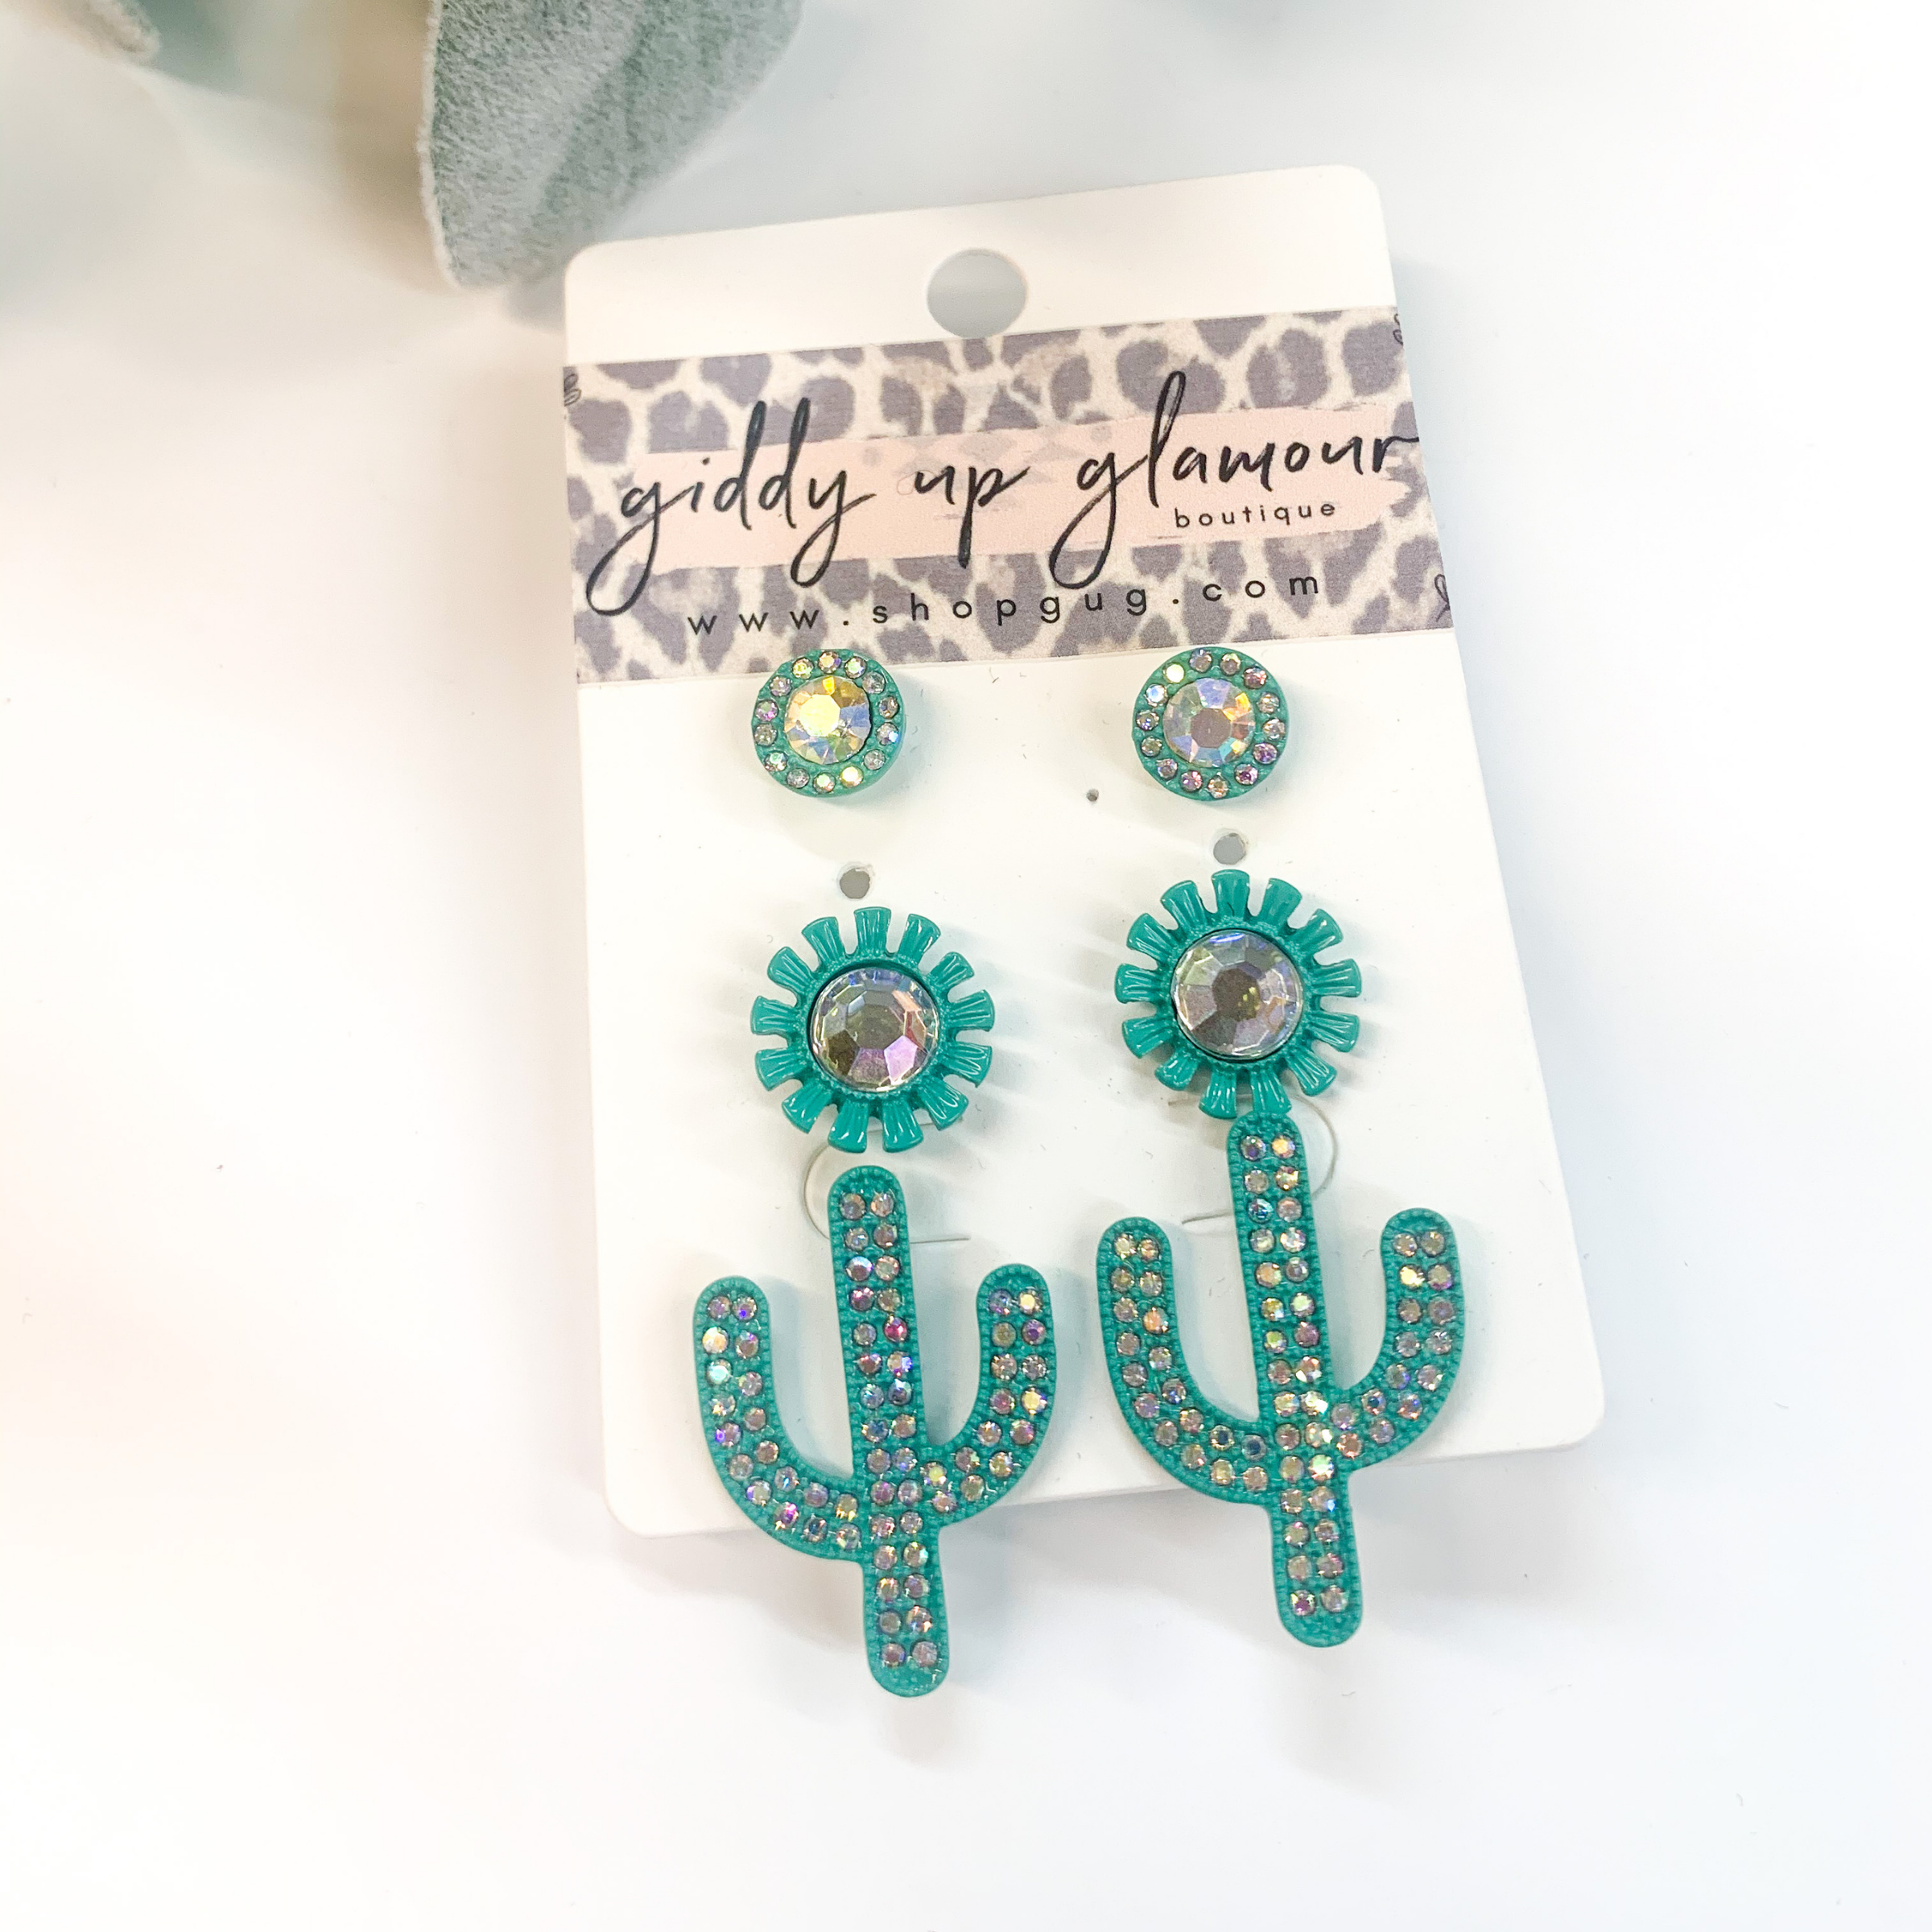 Set of Three | Cactus Stud Earring Set with AB Crystals in Turquoise - Giddy Up Glamour Boutique